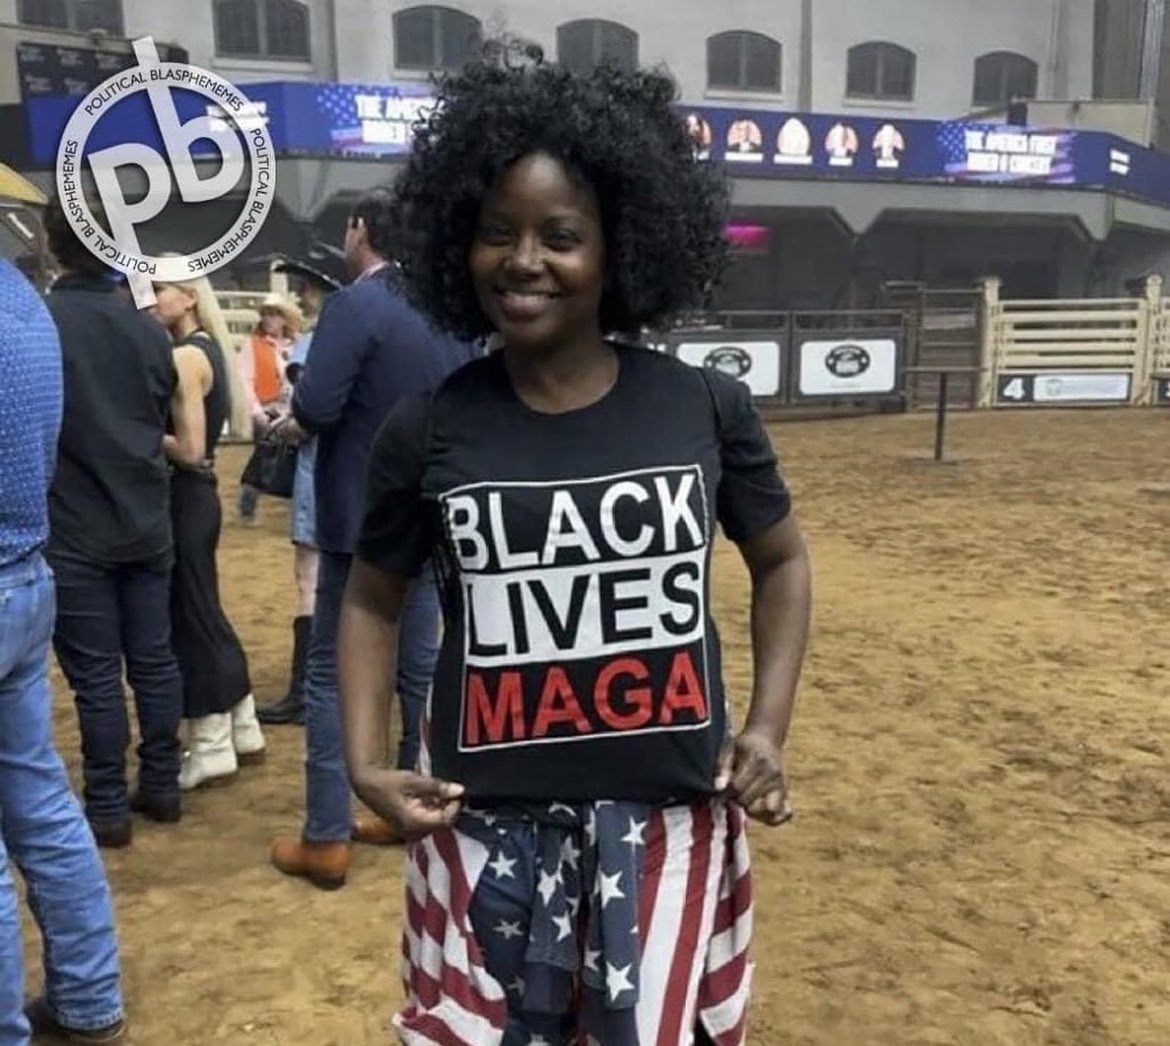 Looks like I support BLM after all #MAGA #trump2024maga